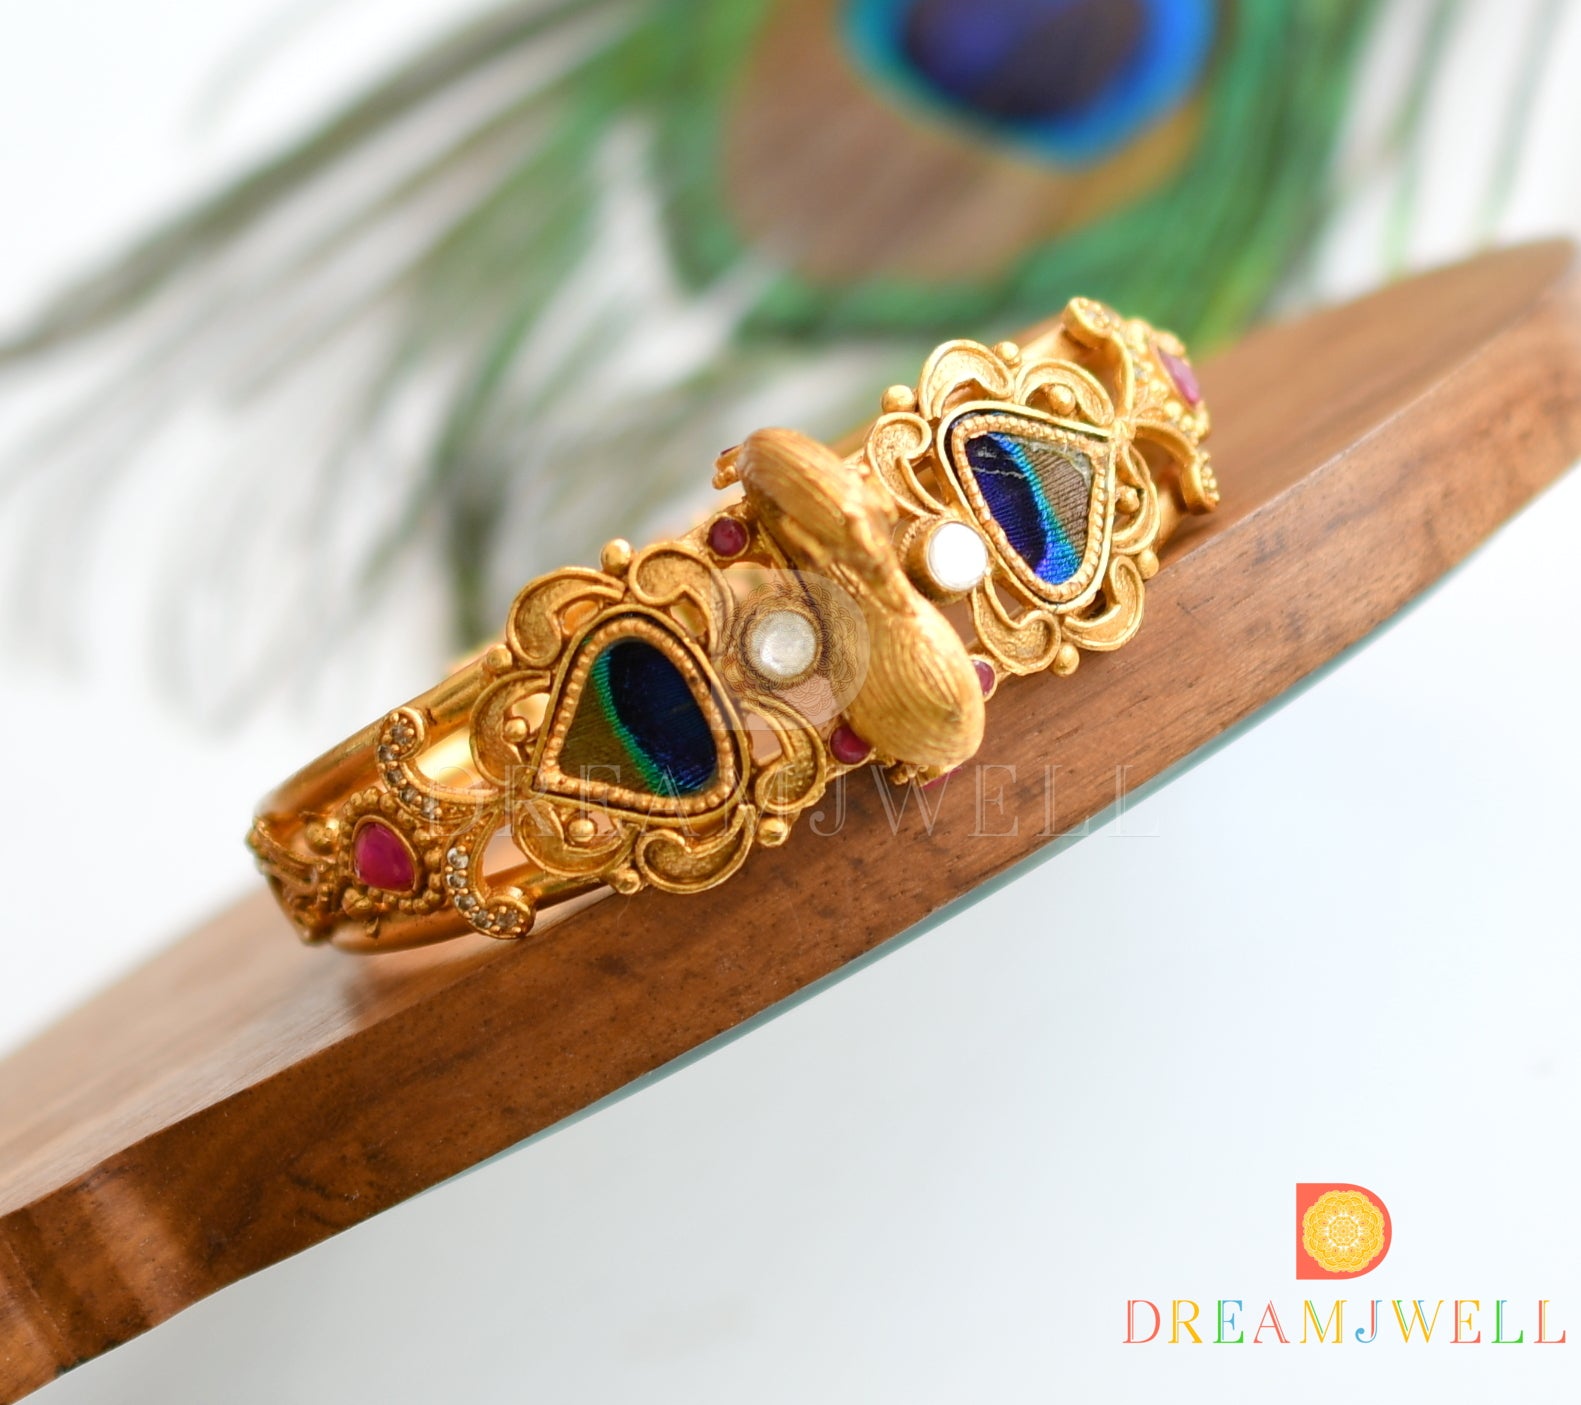 Blue & Green Cuff with Peacock Feathers & 24k Gold Plating